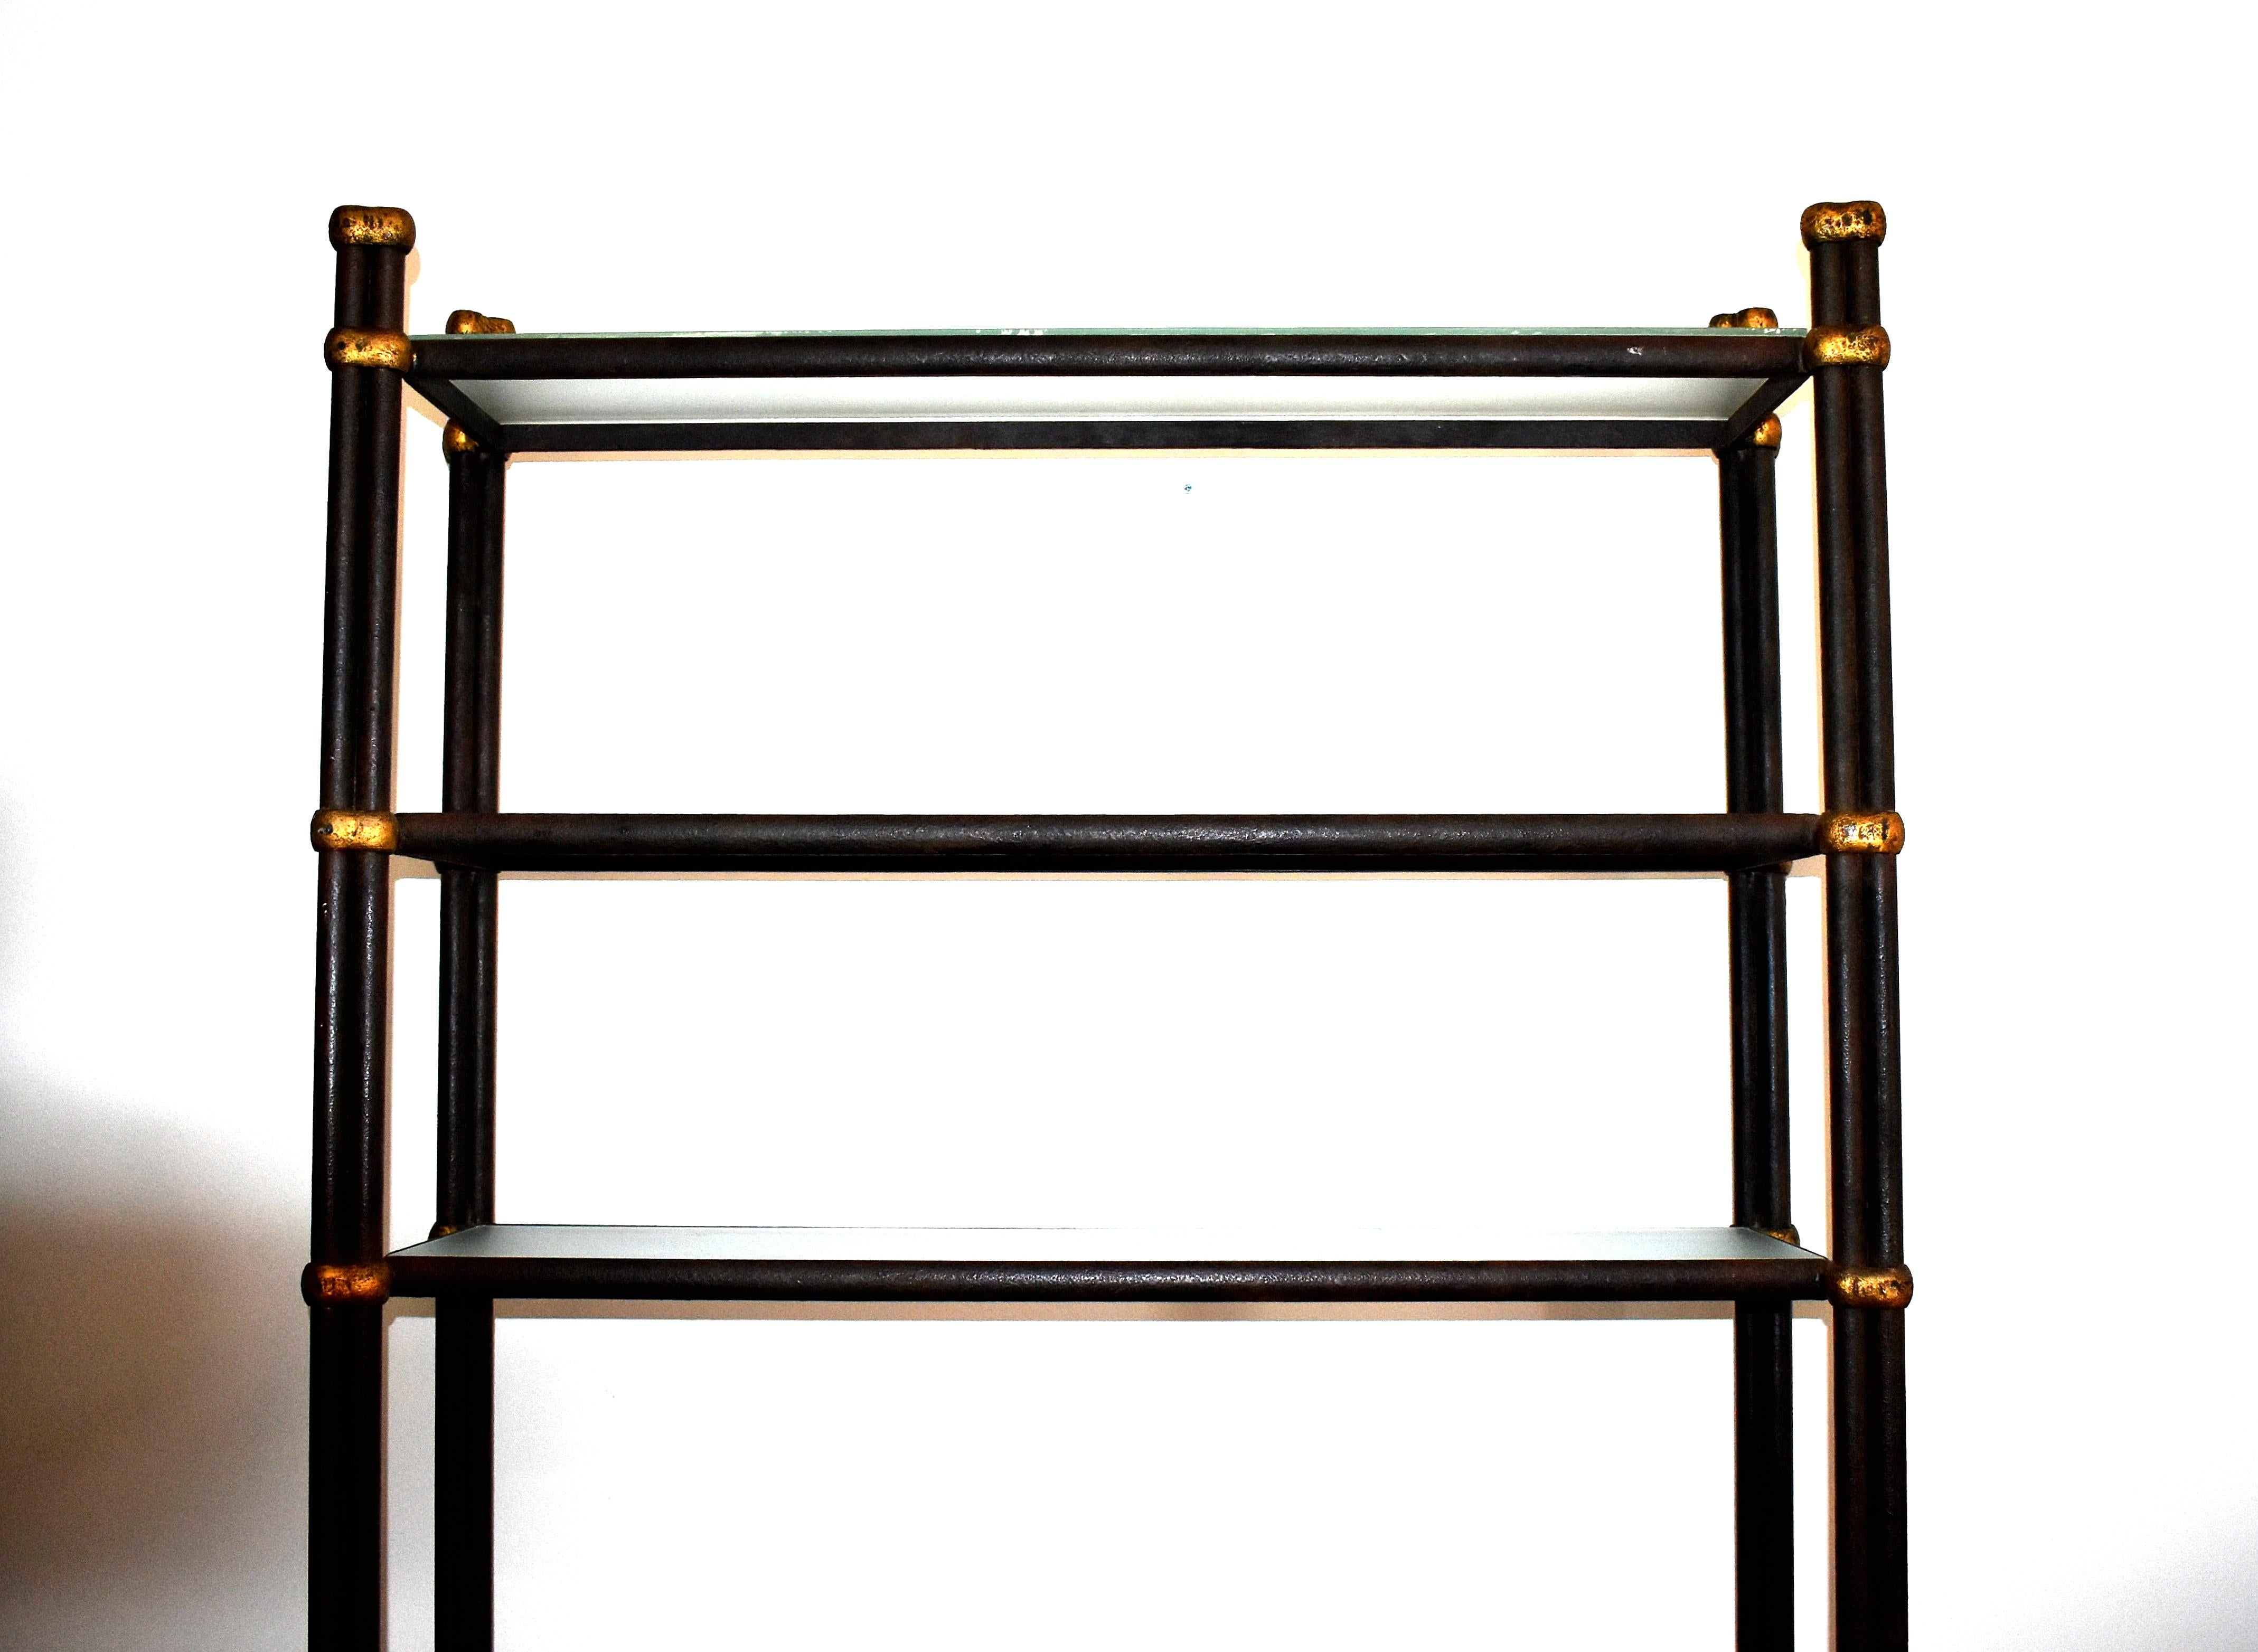 Wrought iron tall and narrow shelf unit. Elegant freestanding shelf of wrought iron with textured glass and gold detail finish. Architectural etagere features six rectangular shelves.